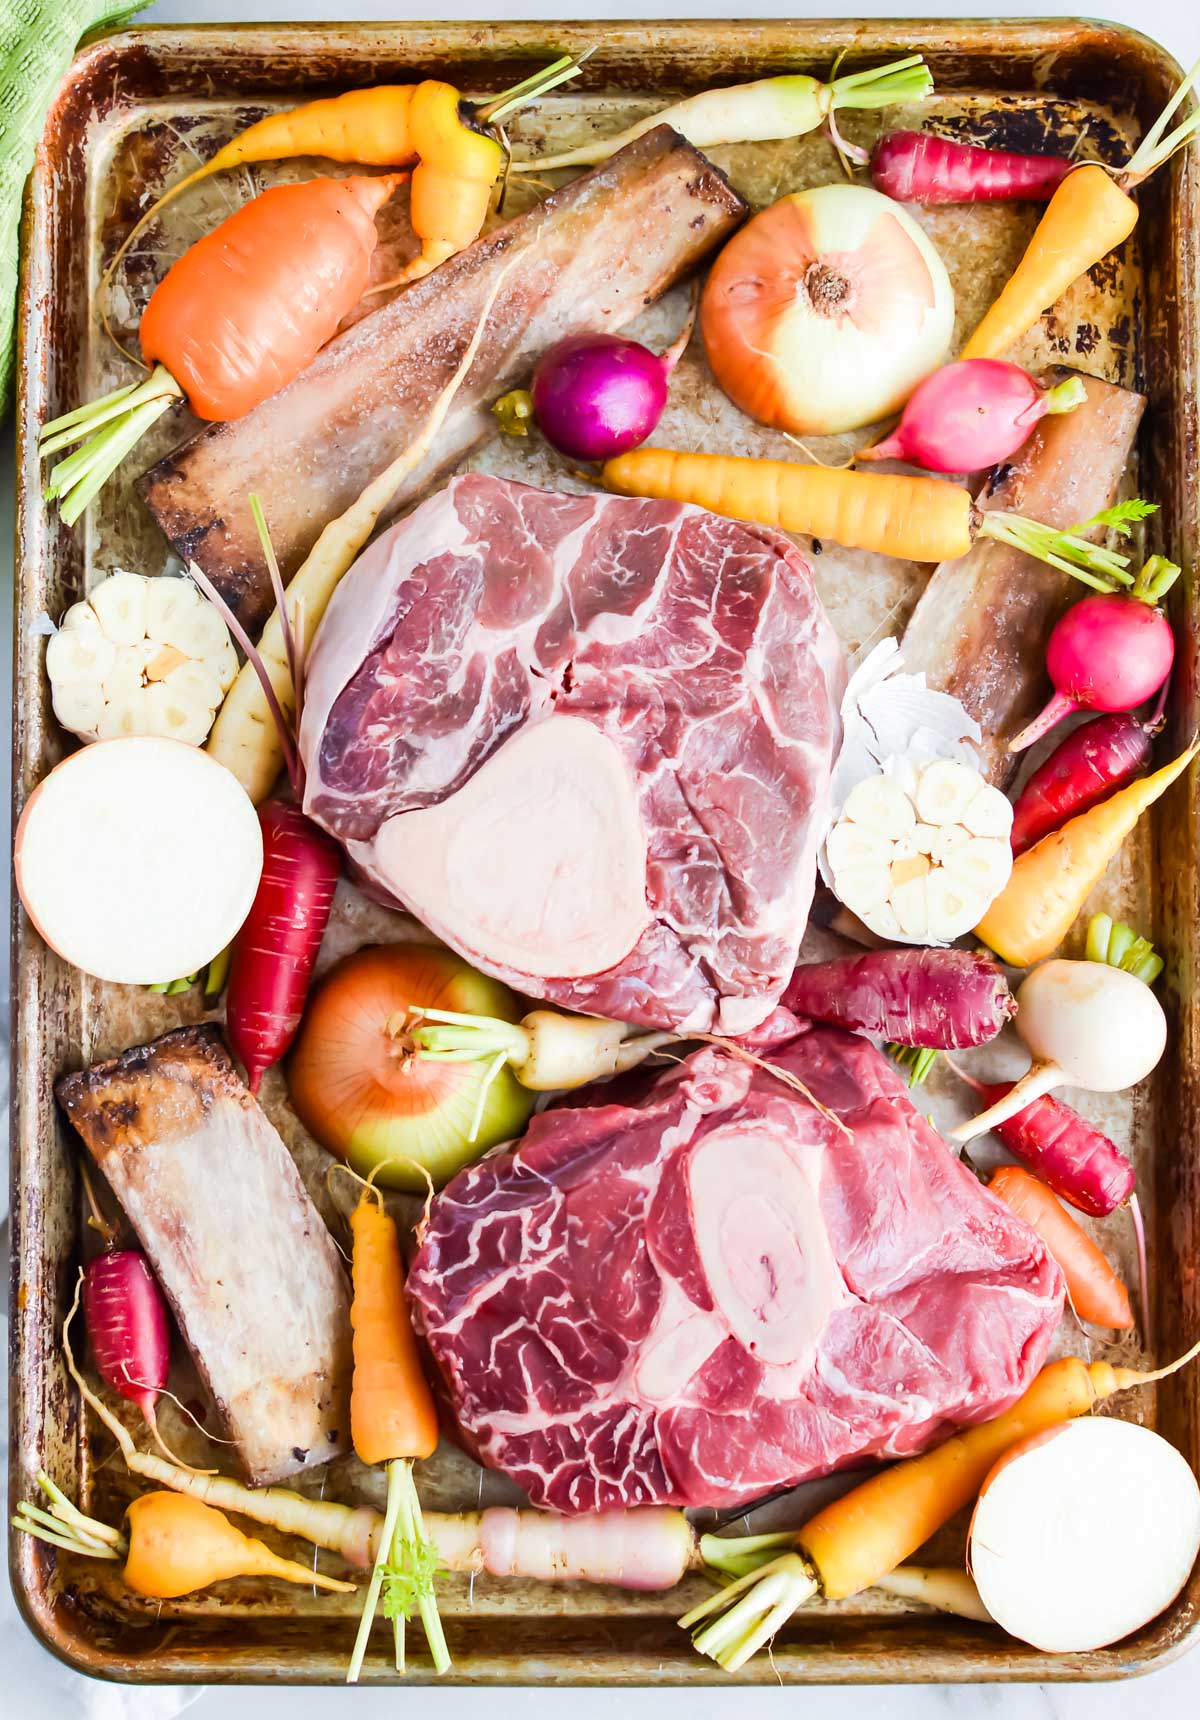 bone broth ingredients with veggies on a baking sheet, including radishes, carrots, bones, onions and garlic